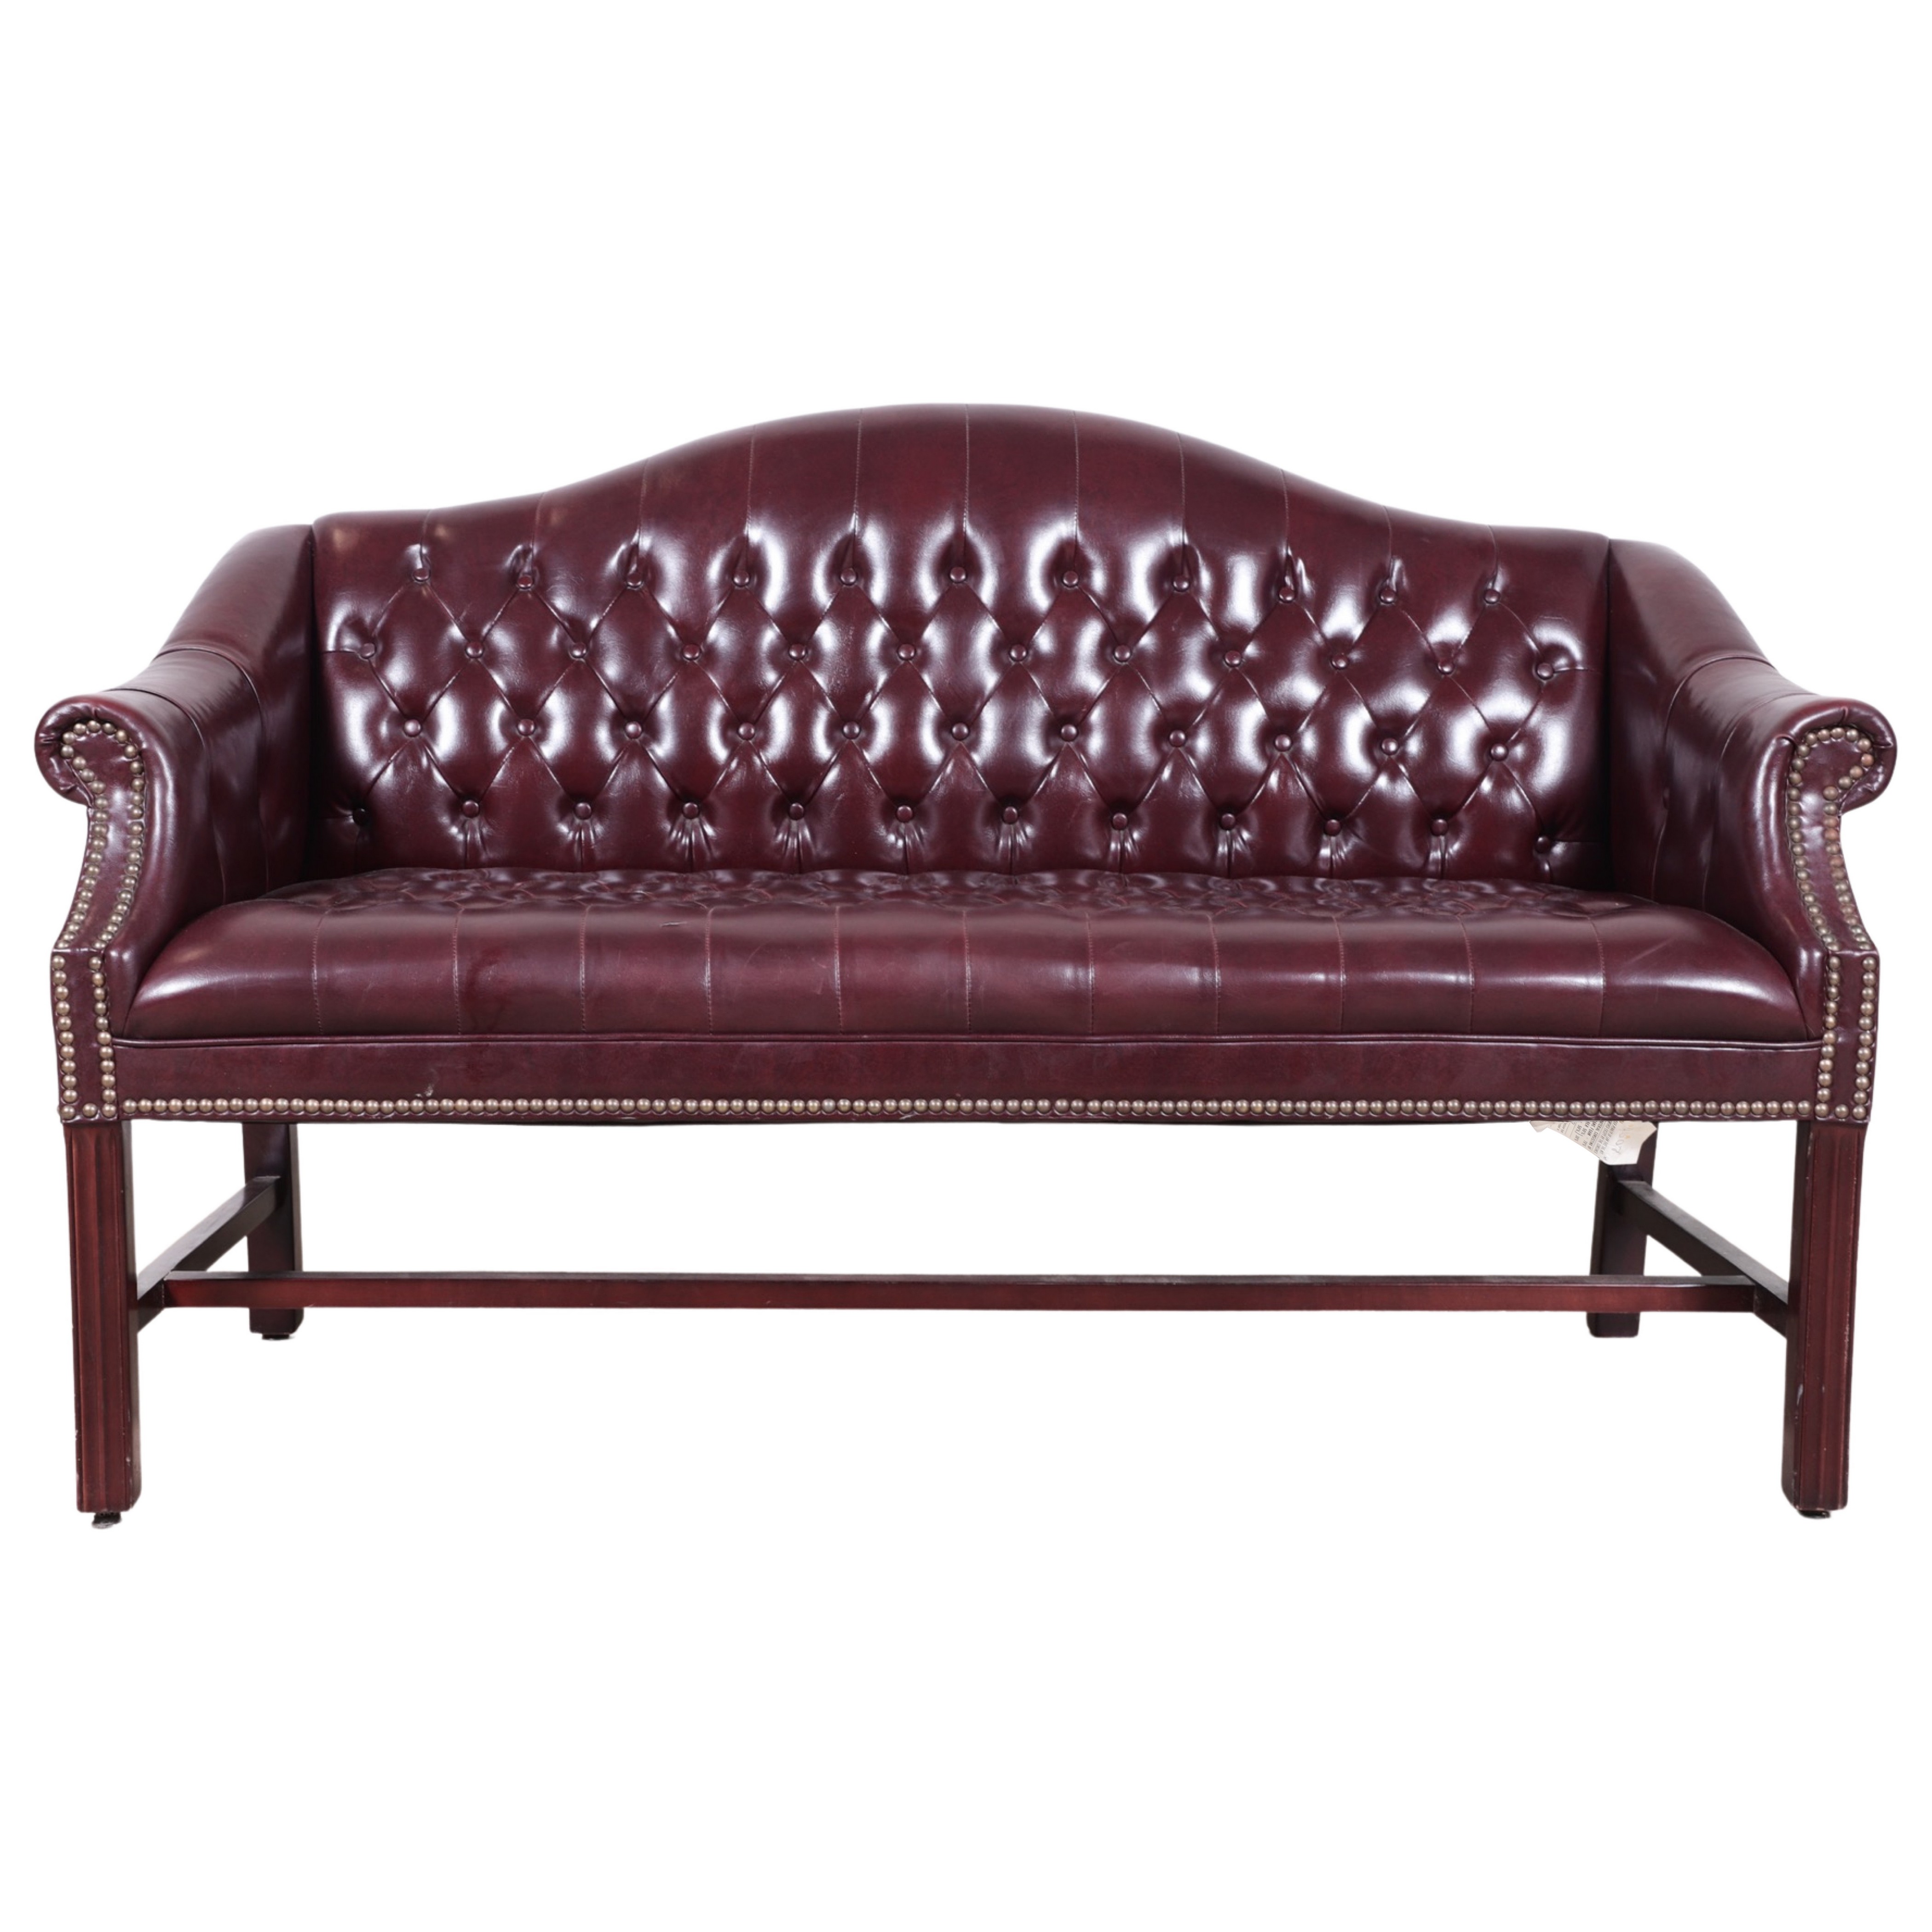 Chippendale style tufted upholstered 3b4af5